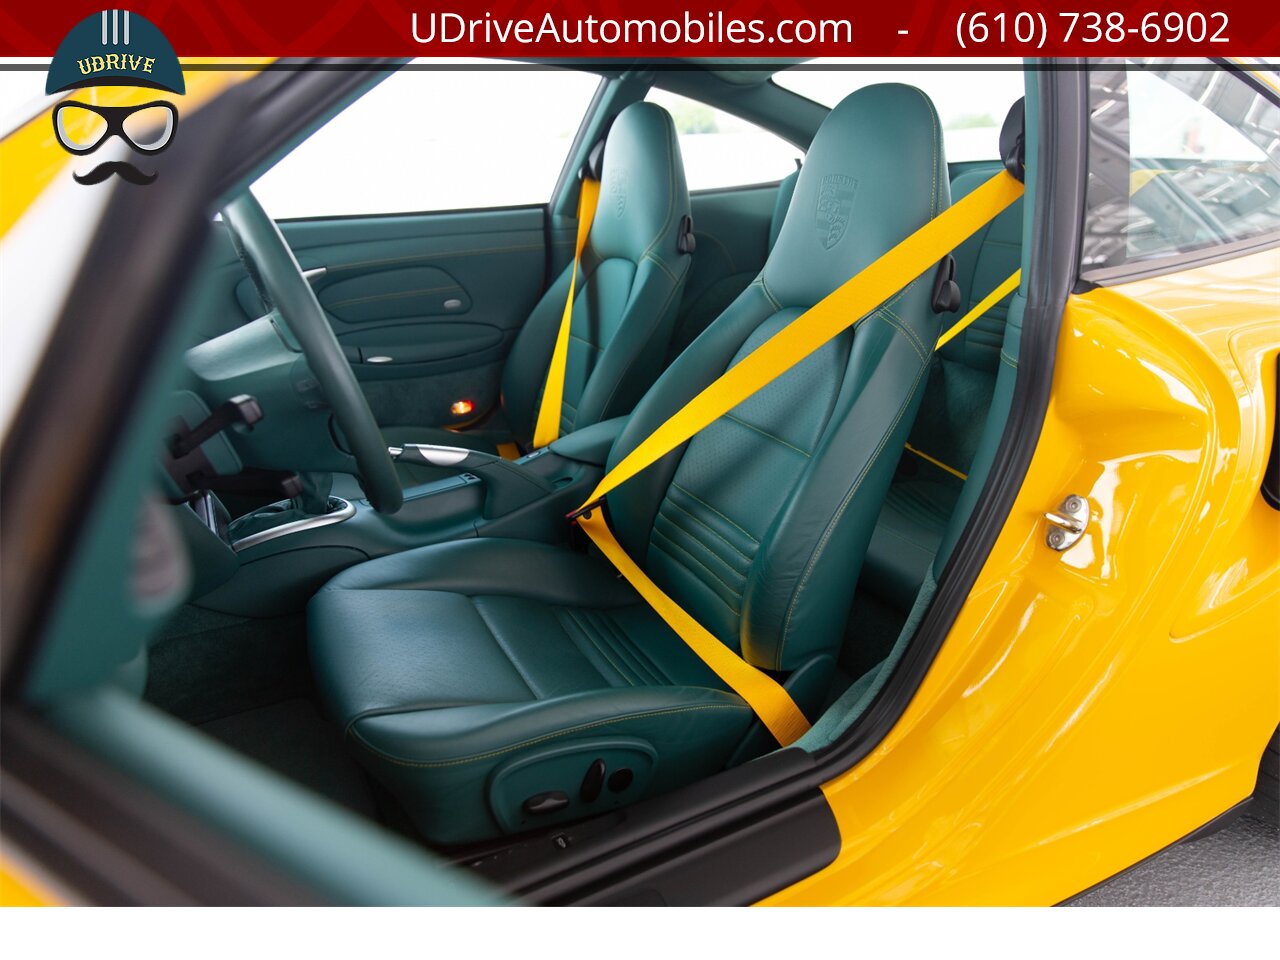 2003 Porsche 911 996 Turbo X50 6Sp Nephrite Green Lthr 9k Miles  Deviating Yellow Stitching Collector Grade BACK AGAIN - Photo 27 - West Chester, PA 19382